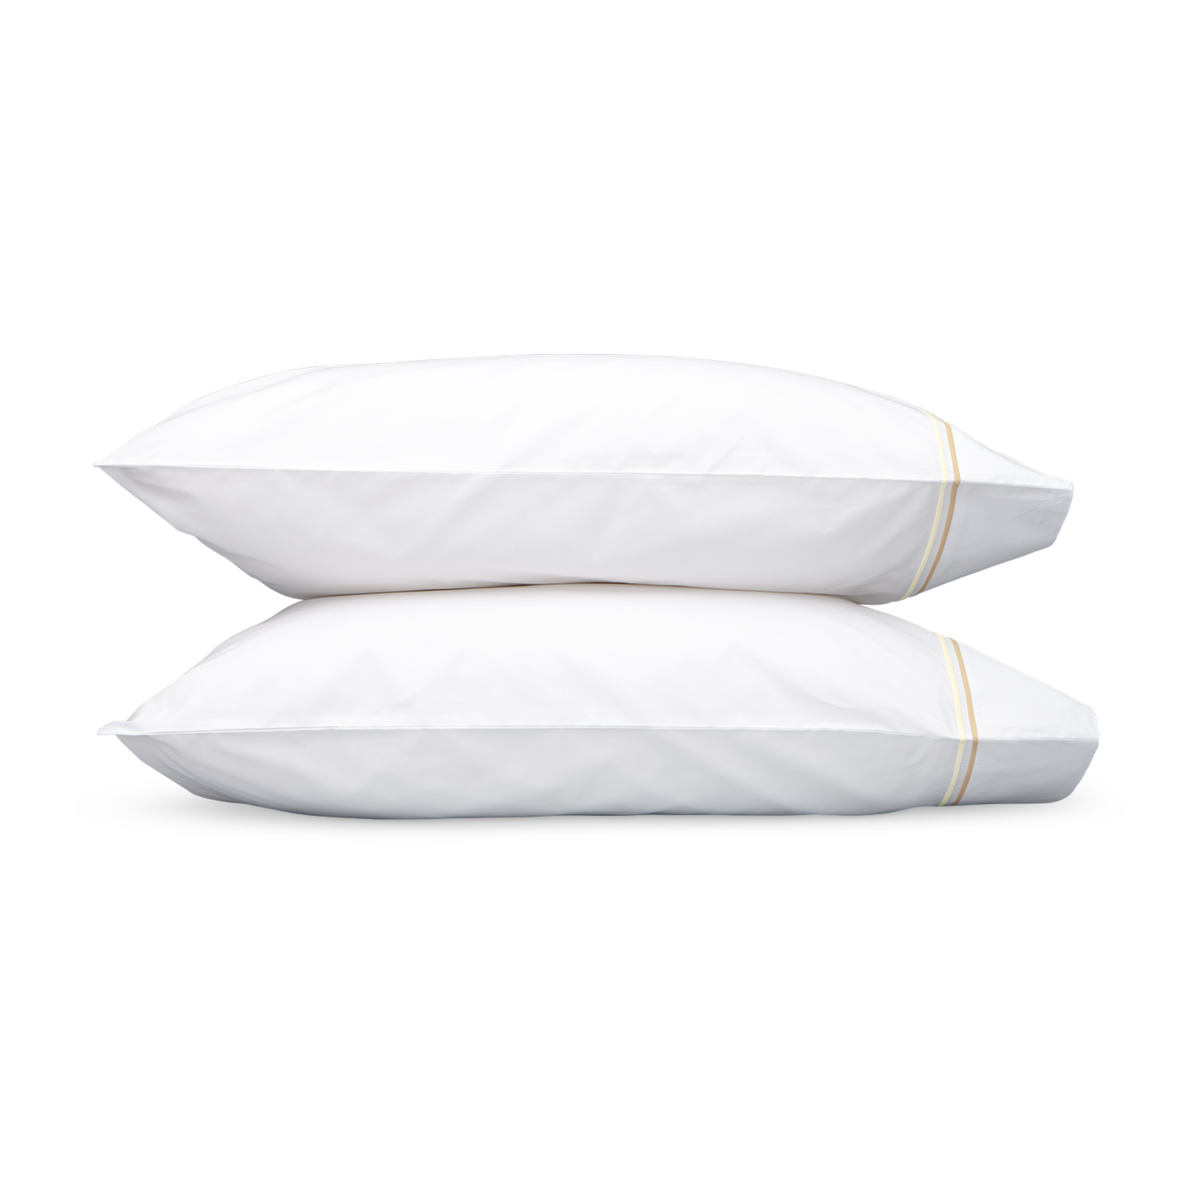 Pair of Pillowcases of Matouk Essex Bedding Collection in Champagne Color